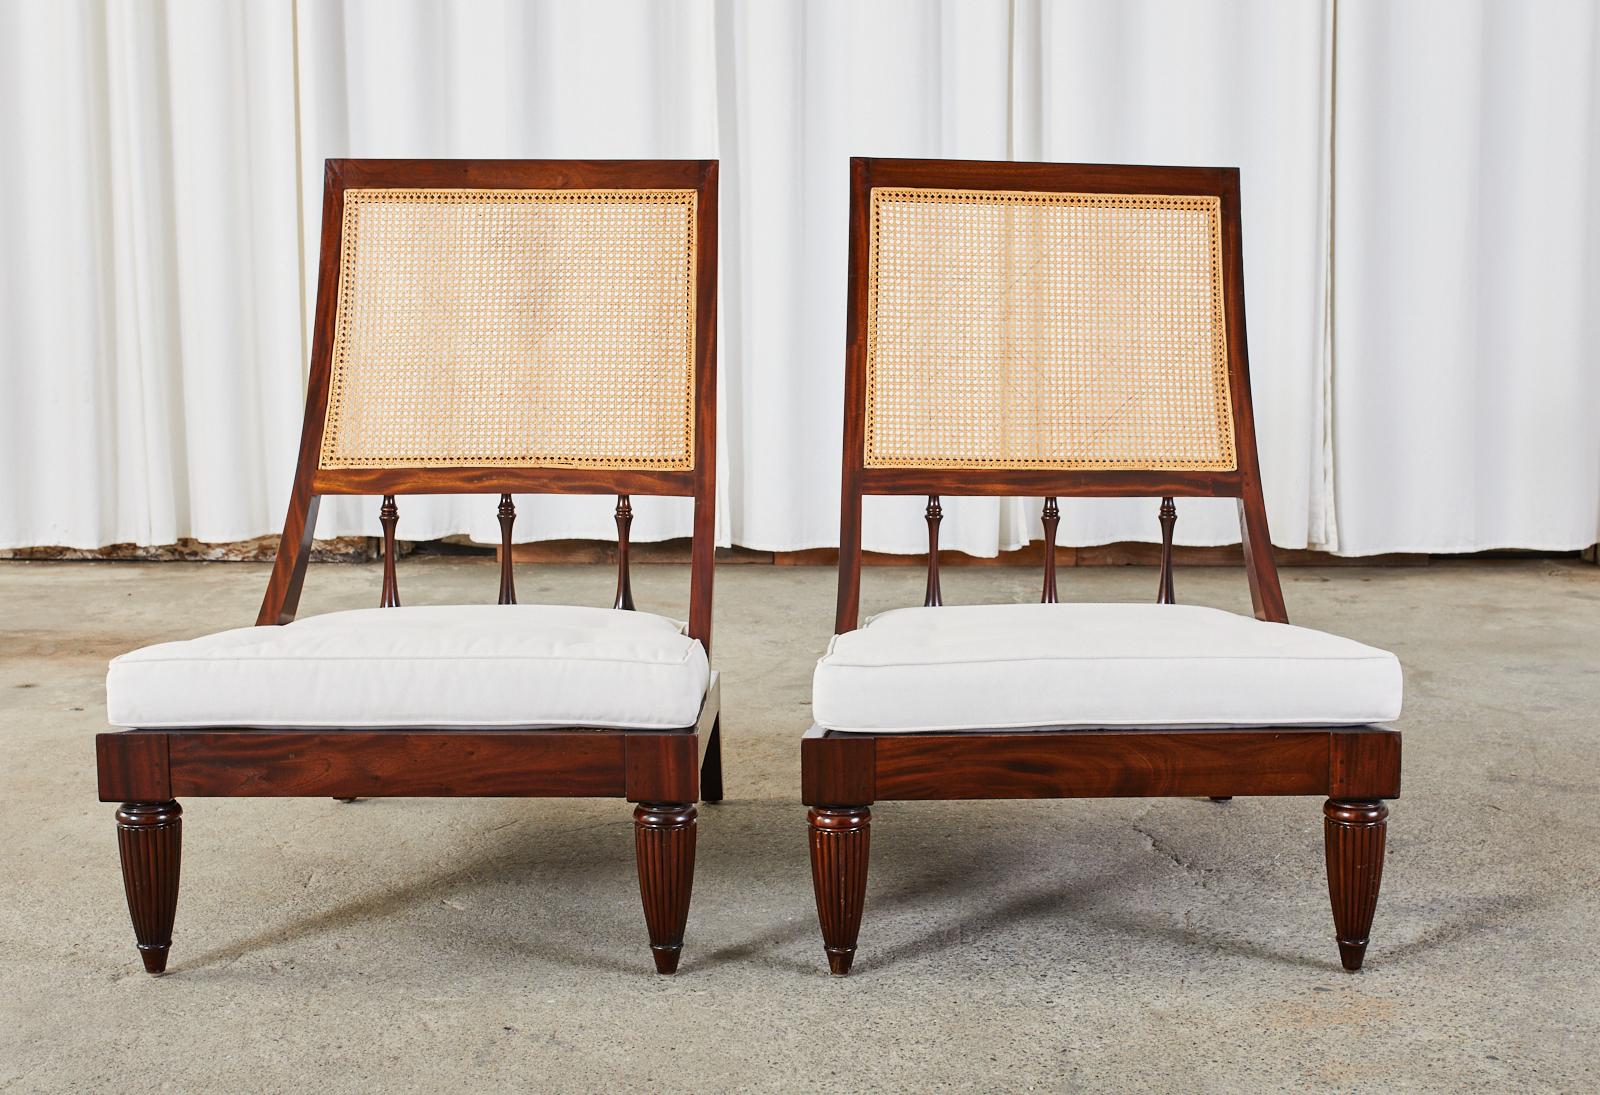 Handsome pair of Anglo-Indian plantation lounge chairs or campeche chairs hand-crafted from teak. The chairs feature a hand-caned seat and back. The frames are constructed from radiant grained teak with a gracefully curved back supported by baluster